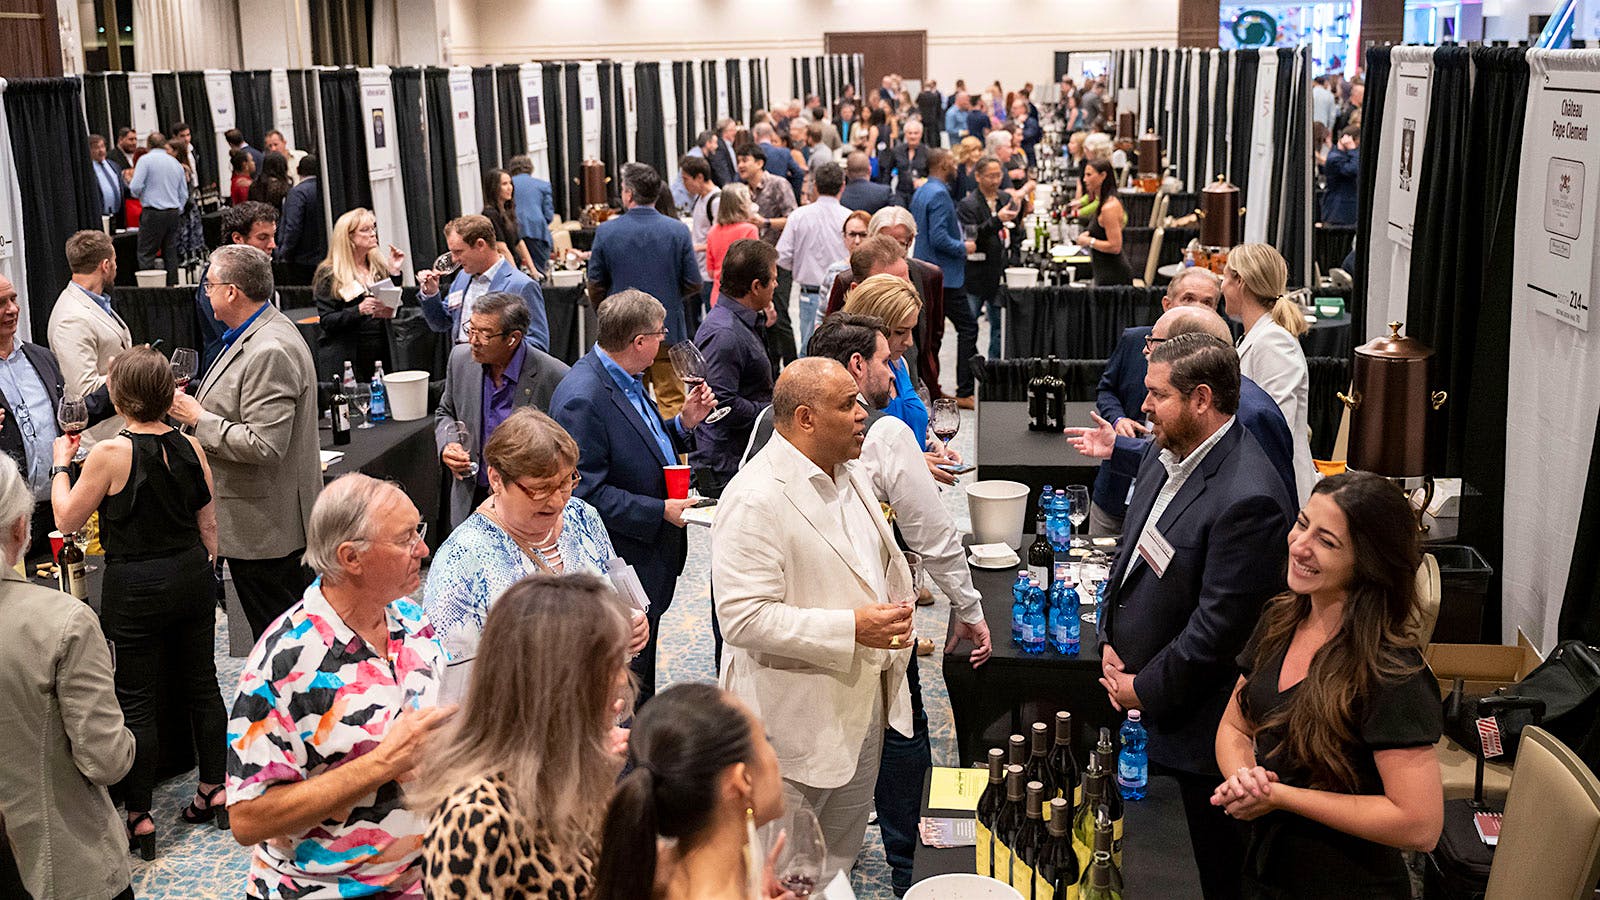 Vegas Vibes: Highlights from Wine Spectator’s 2022 Grand Tour Kick-Off